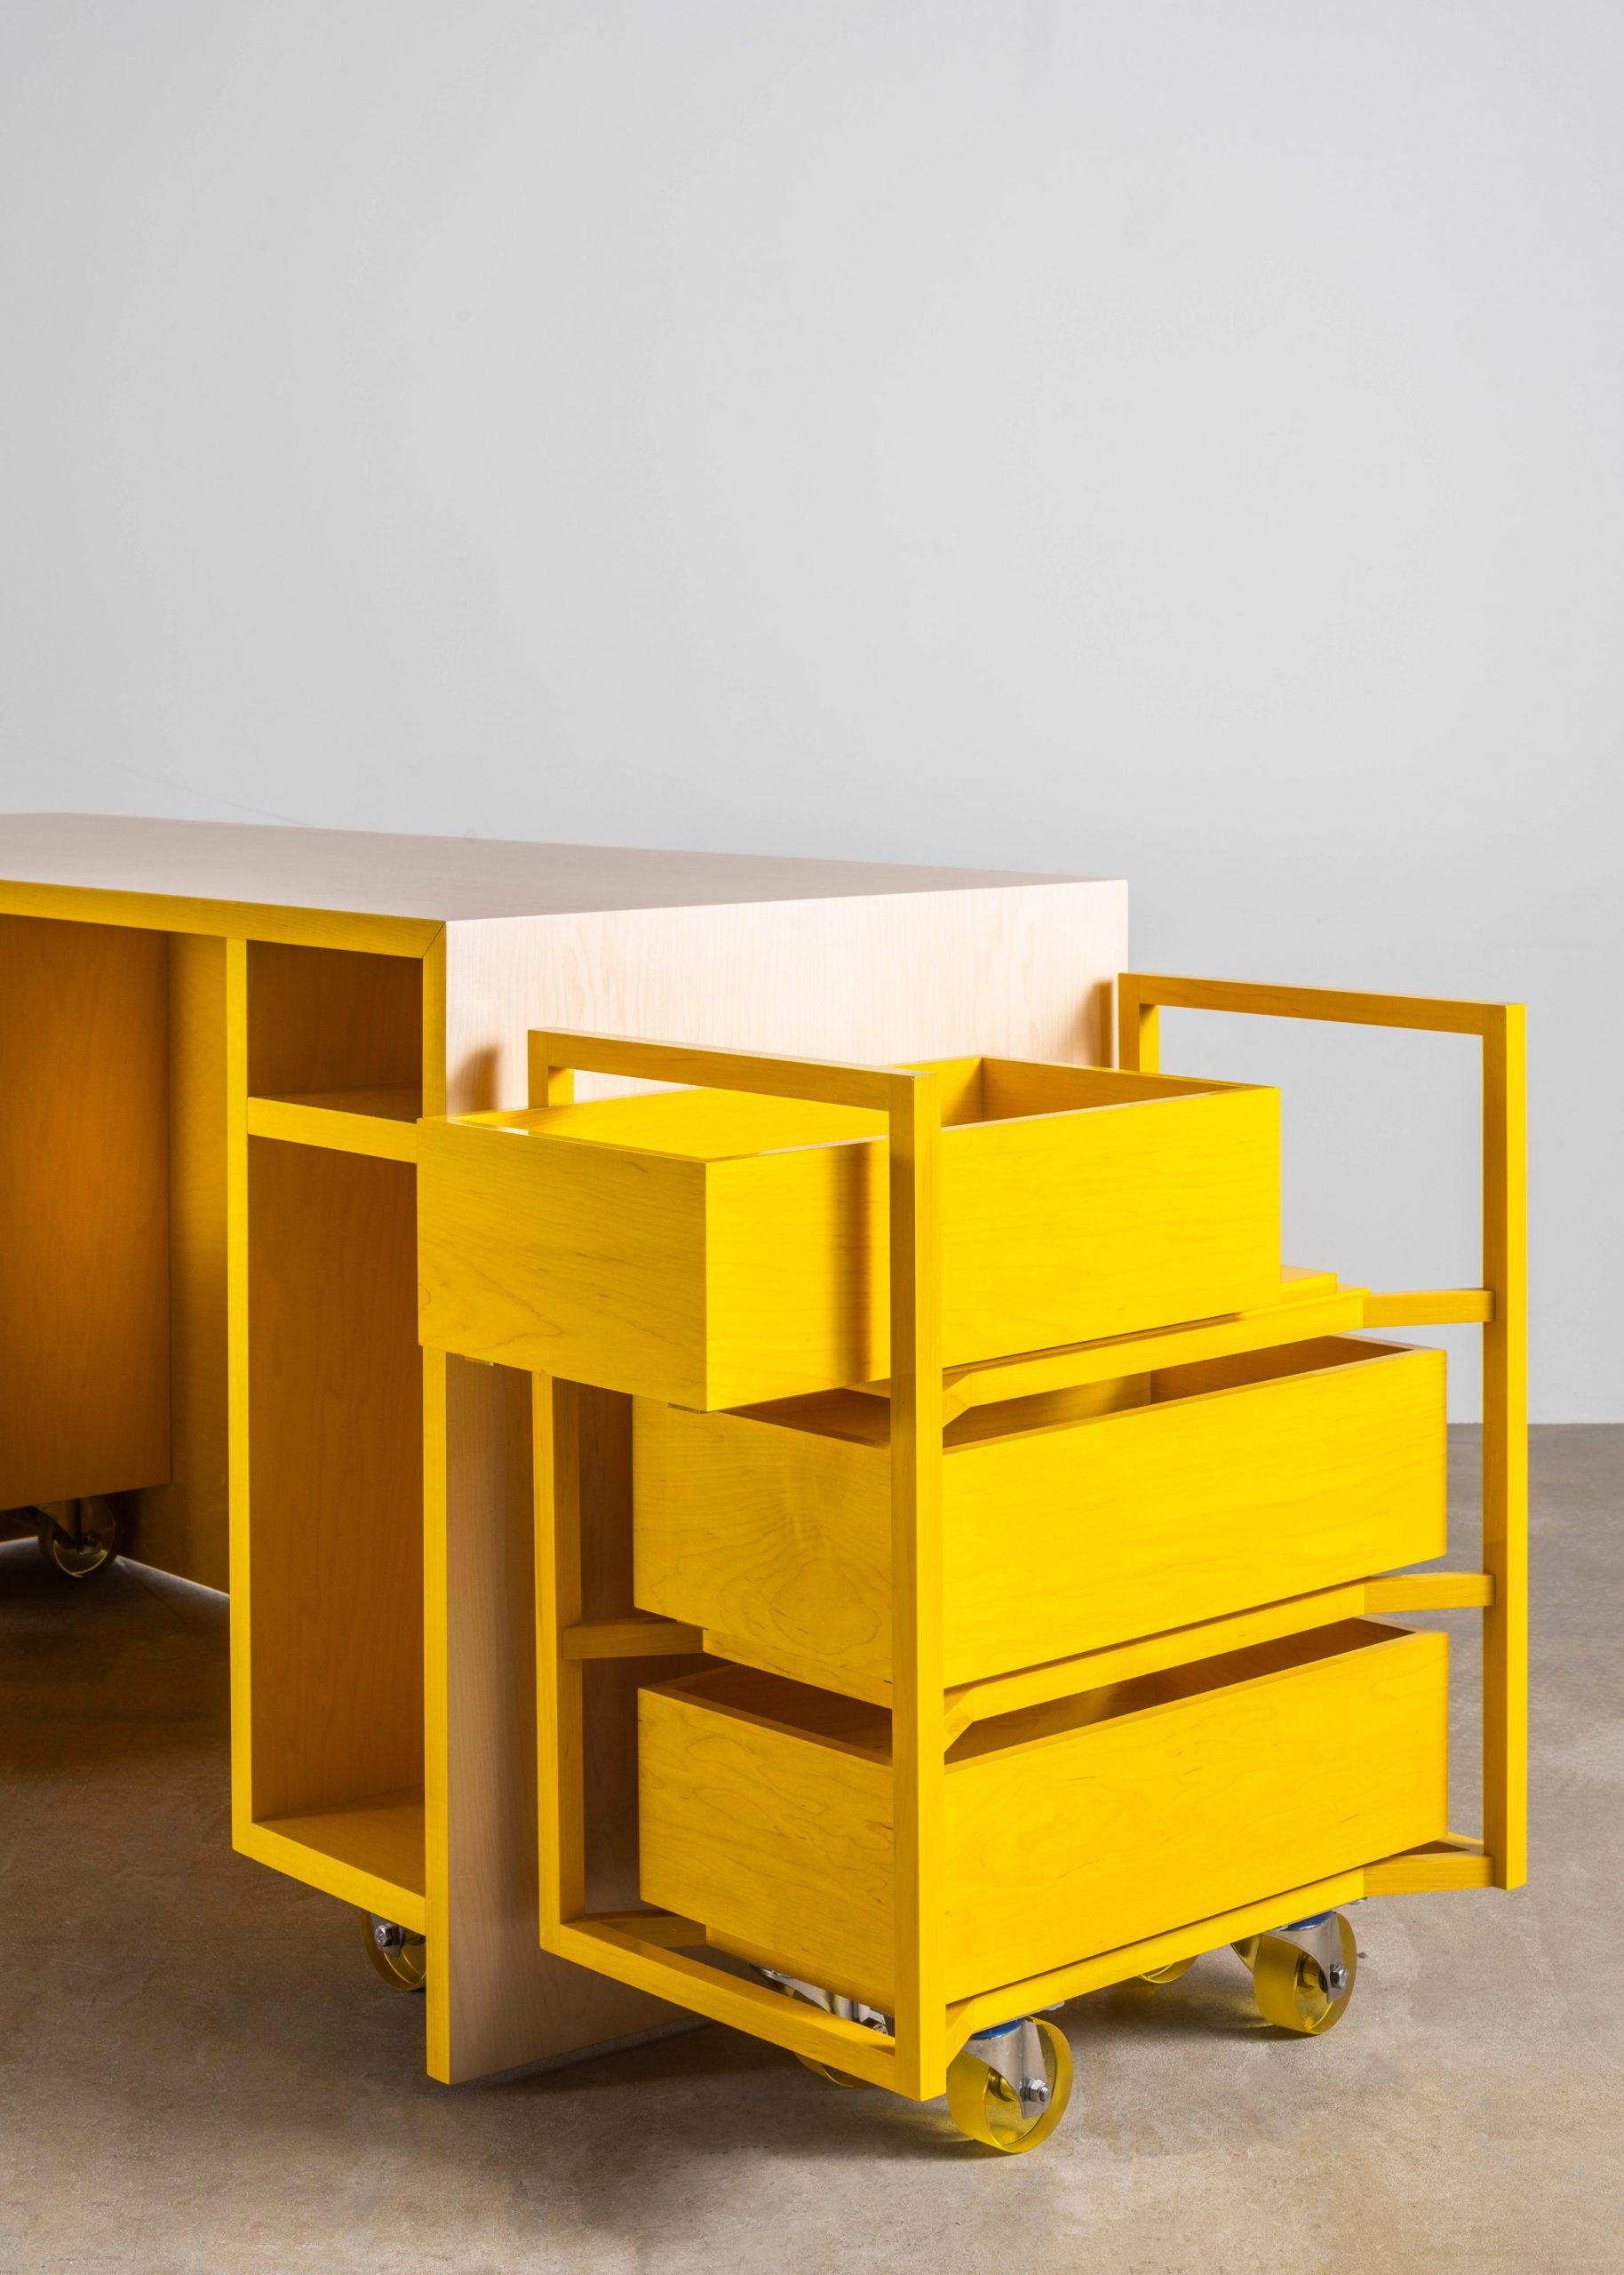 The drawer trolley in Sabine Marcelis's Candy Cubicle desk